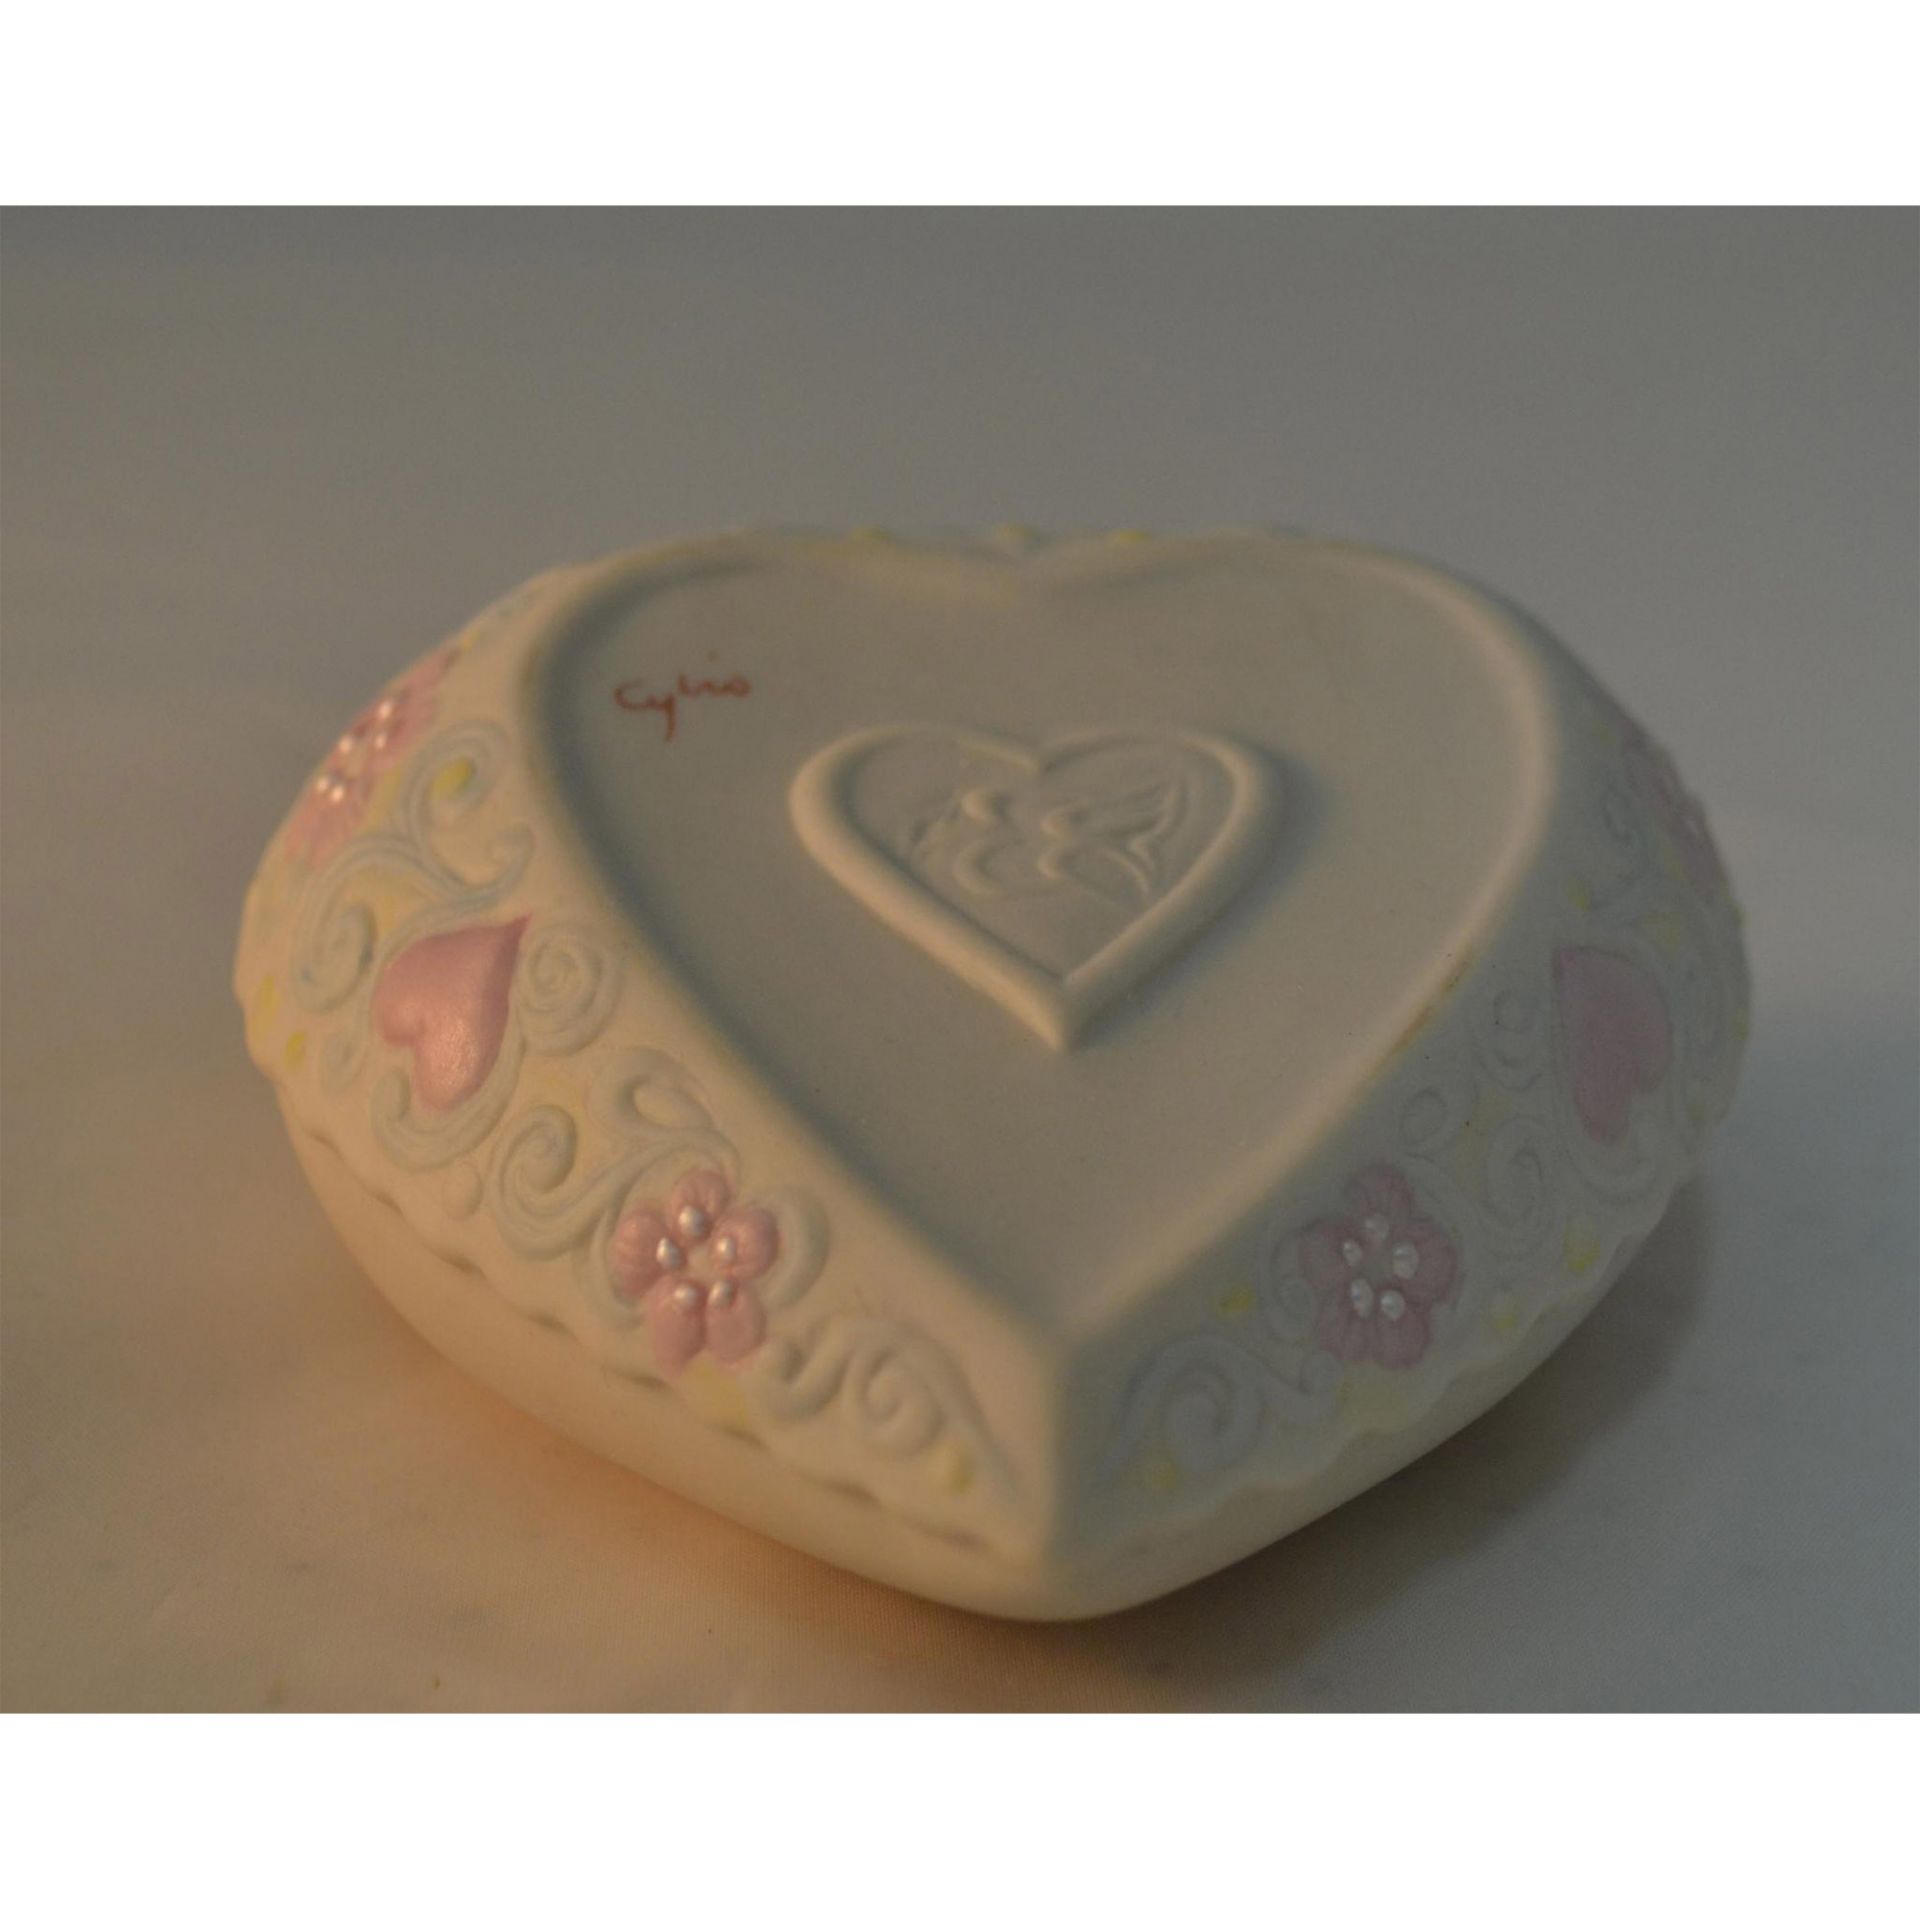 Cybis Porcelain Pastel Lidded Heart Box, Thinking Of You - Image 6 of 6